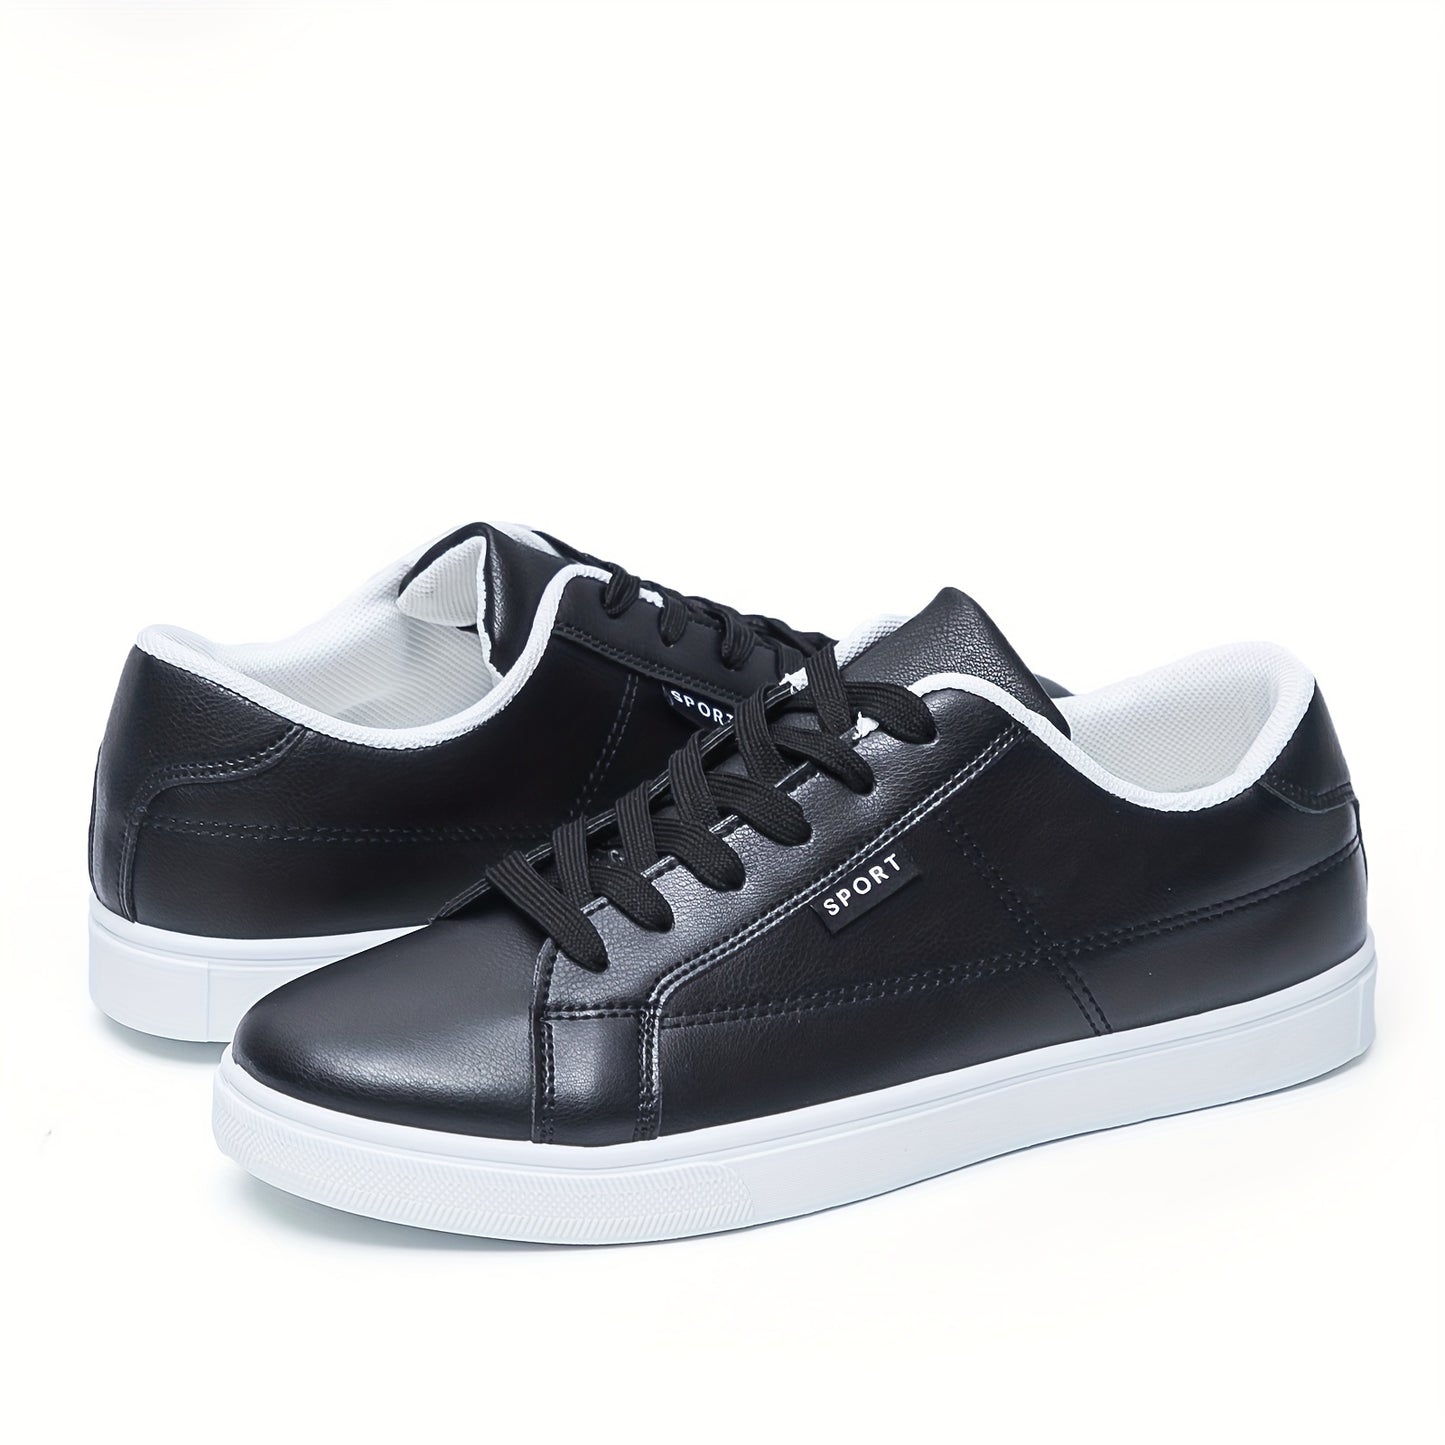 Men's Minimalist Wear-resistant Sneaker For Youth, Spring And Summer